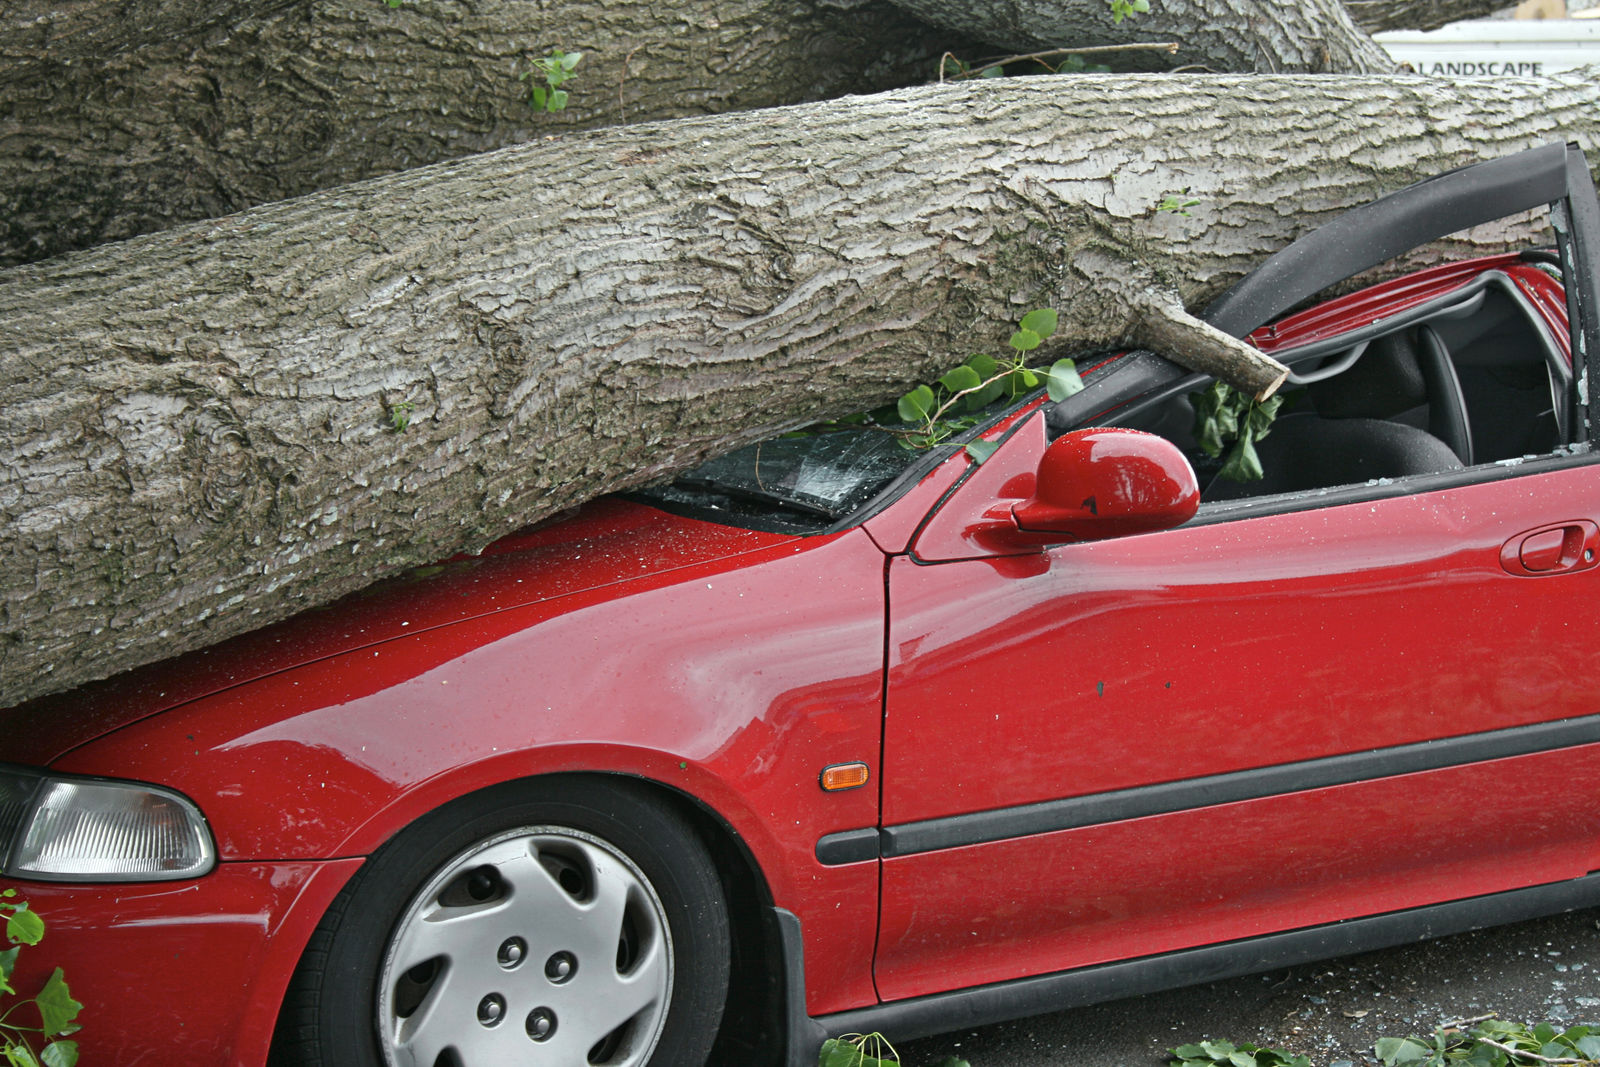 If a tree falls on my car, does insurance cover it?